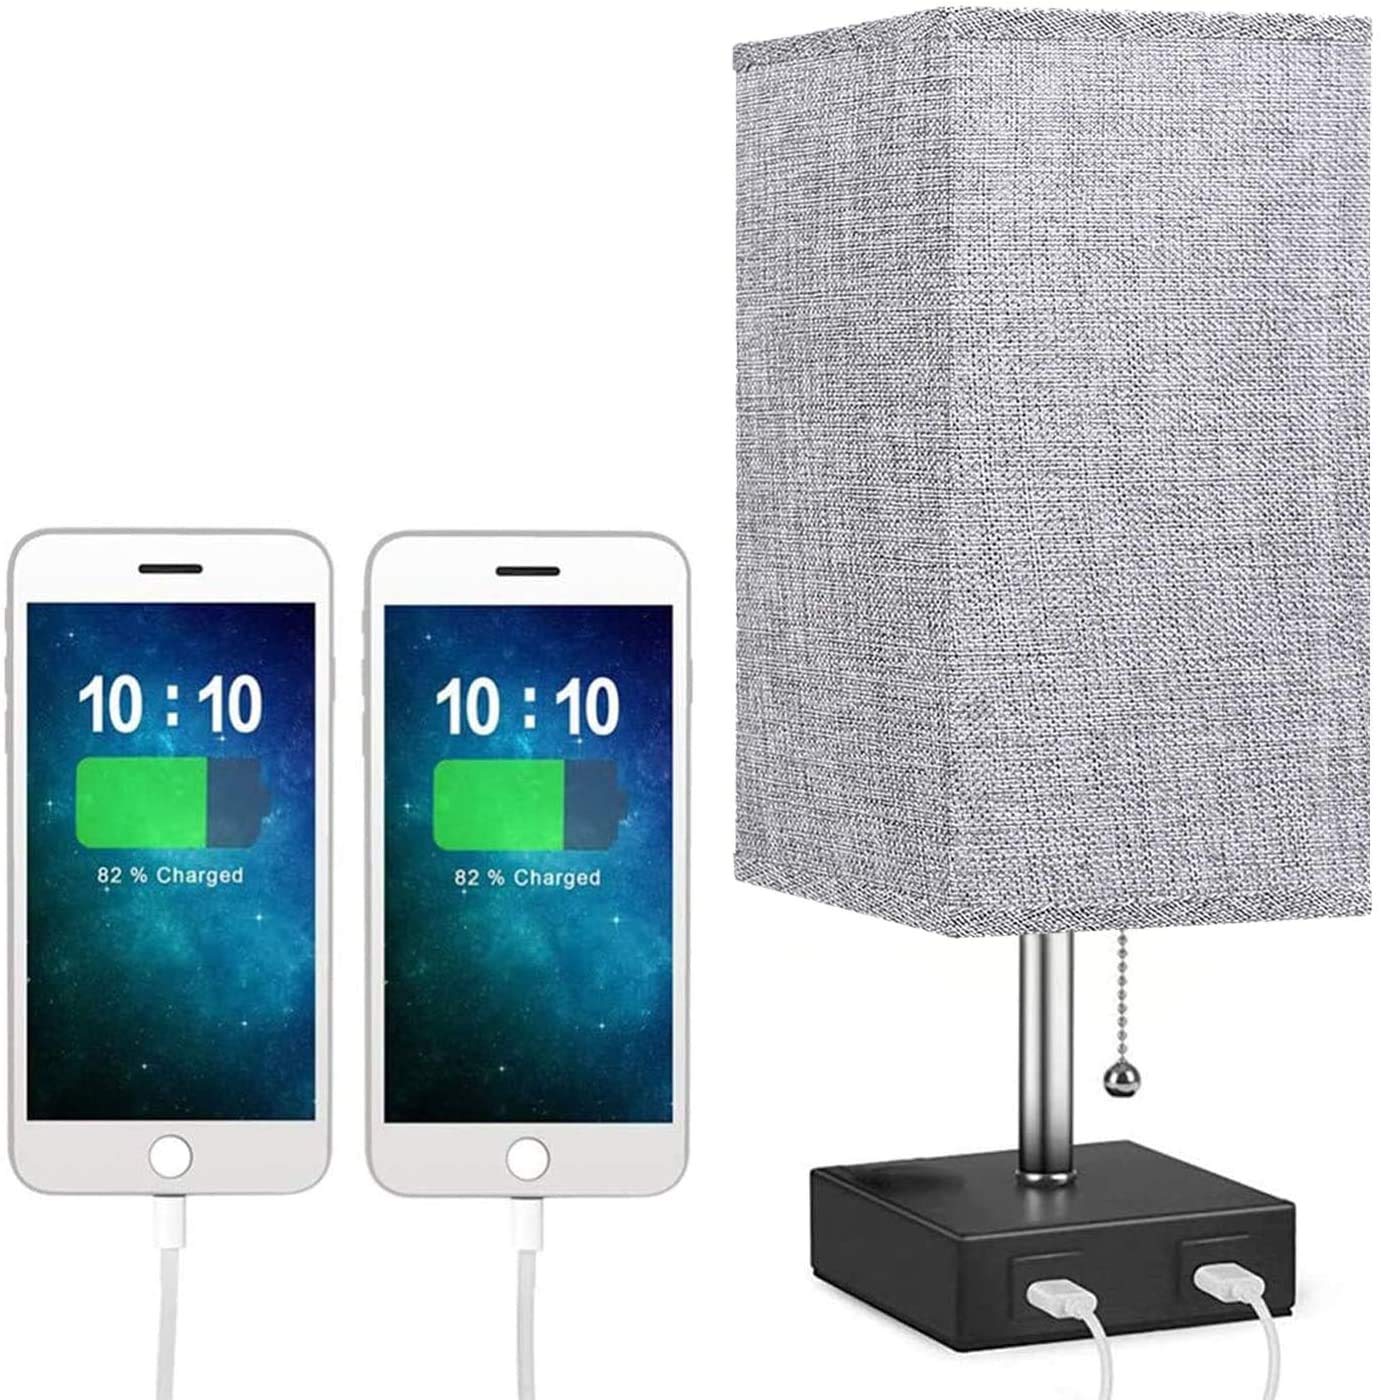 USB Bedside Table Lamps, Modern Table & Desk Lamp with 2 Useful USB Quick Charging Port, Nightstand Lamp with Grey Fabric Shade Perfect for Bedroom, Living Room, Study Room (1 Pack)